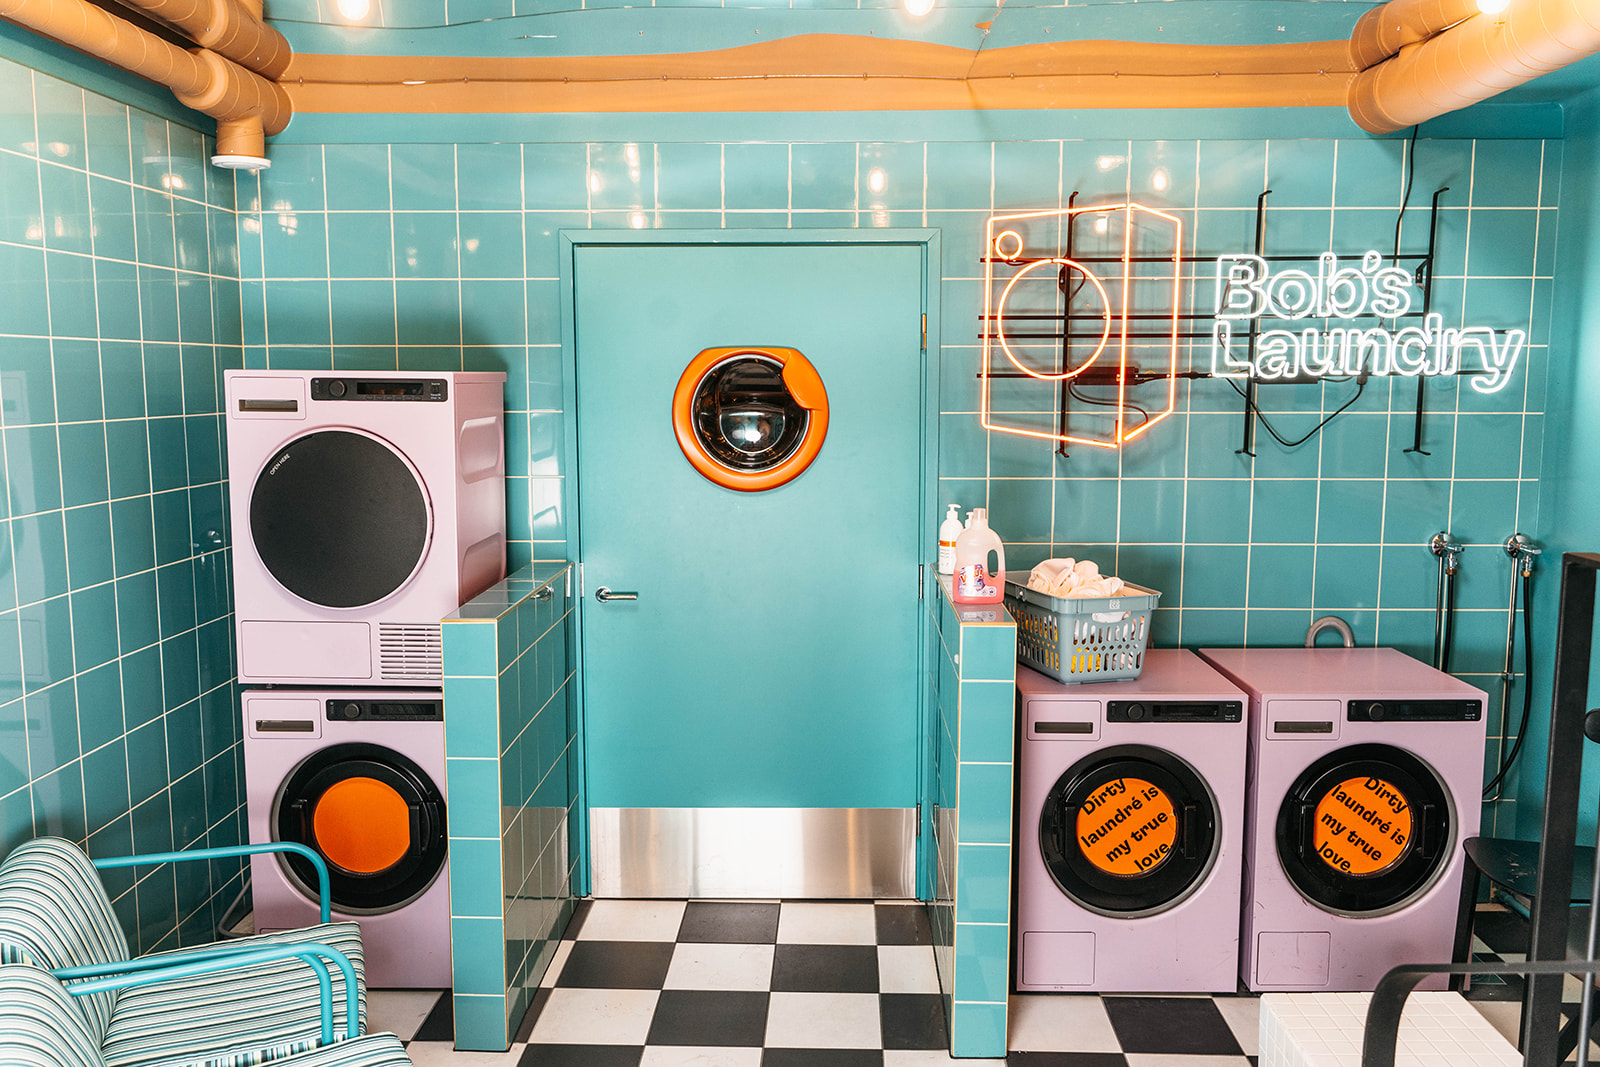 Colorful tiles - case Bobs Laundry Bar